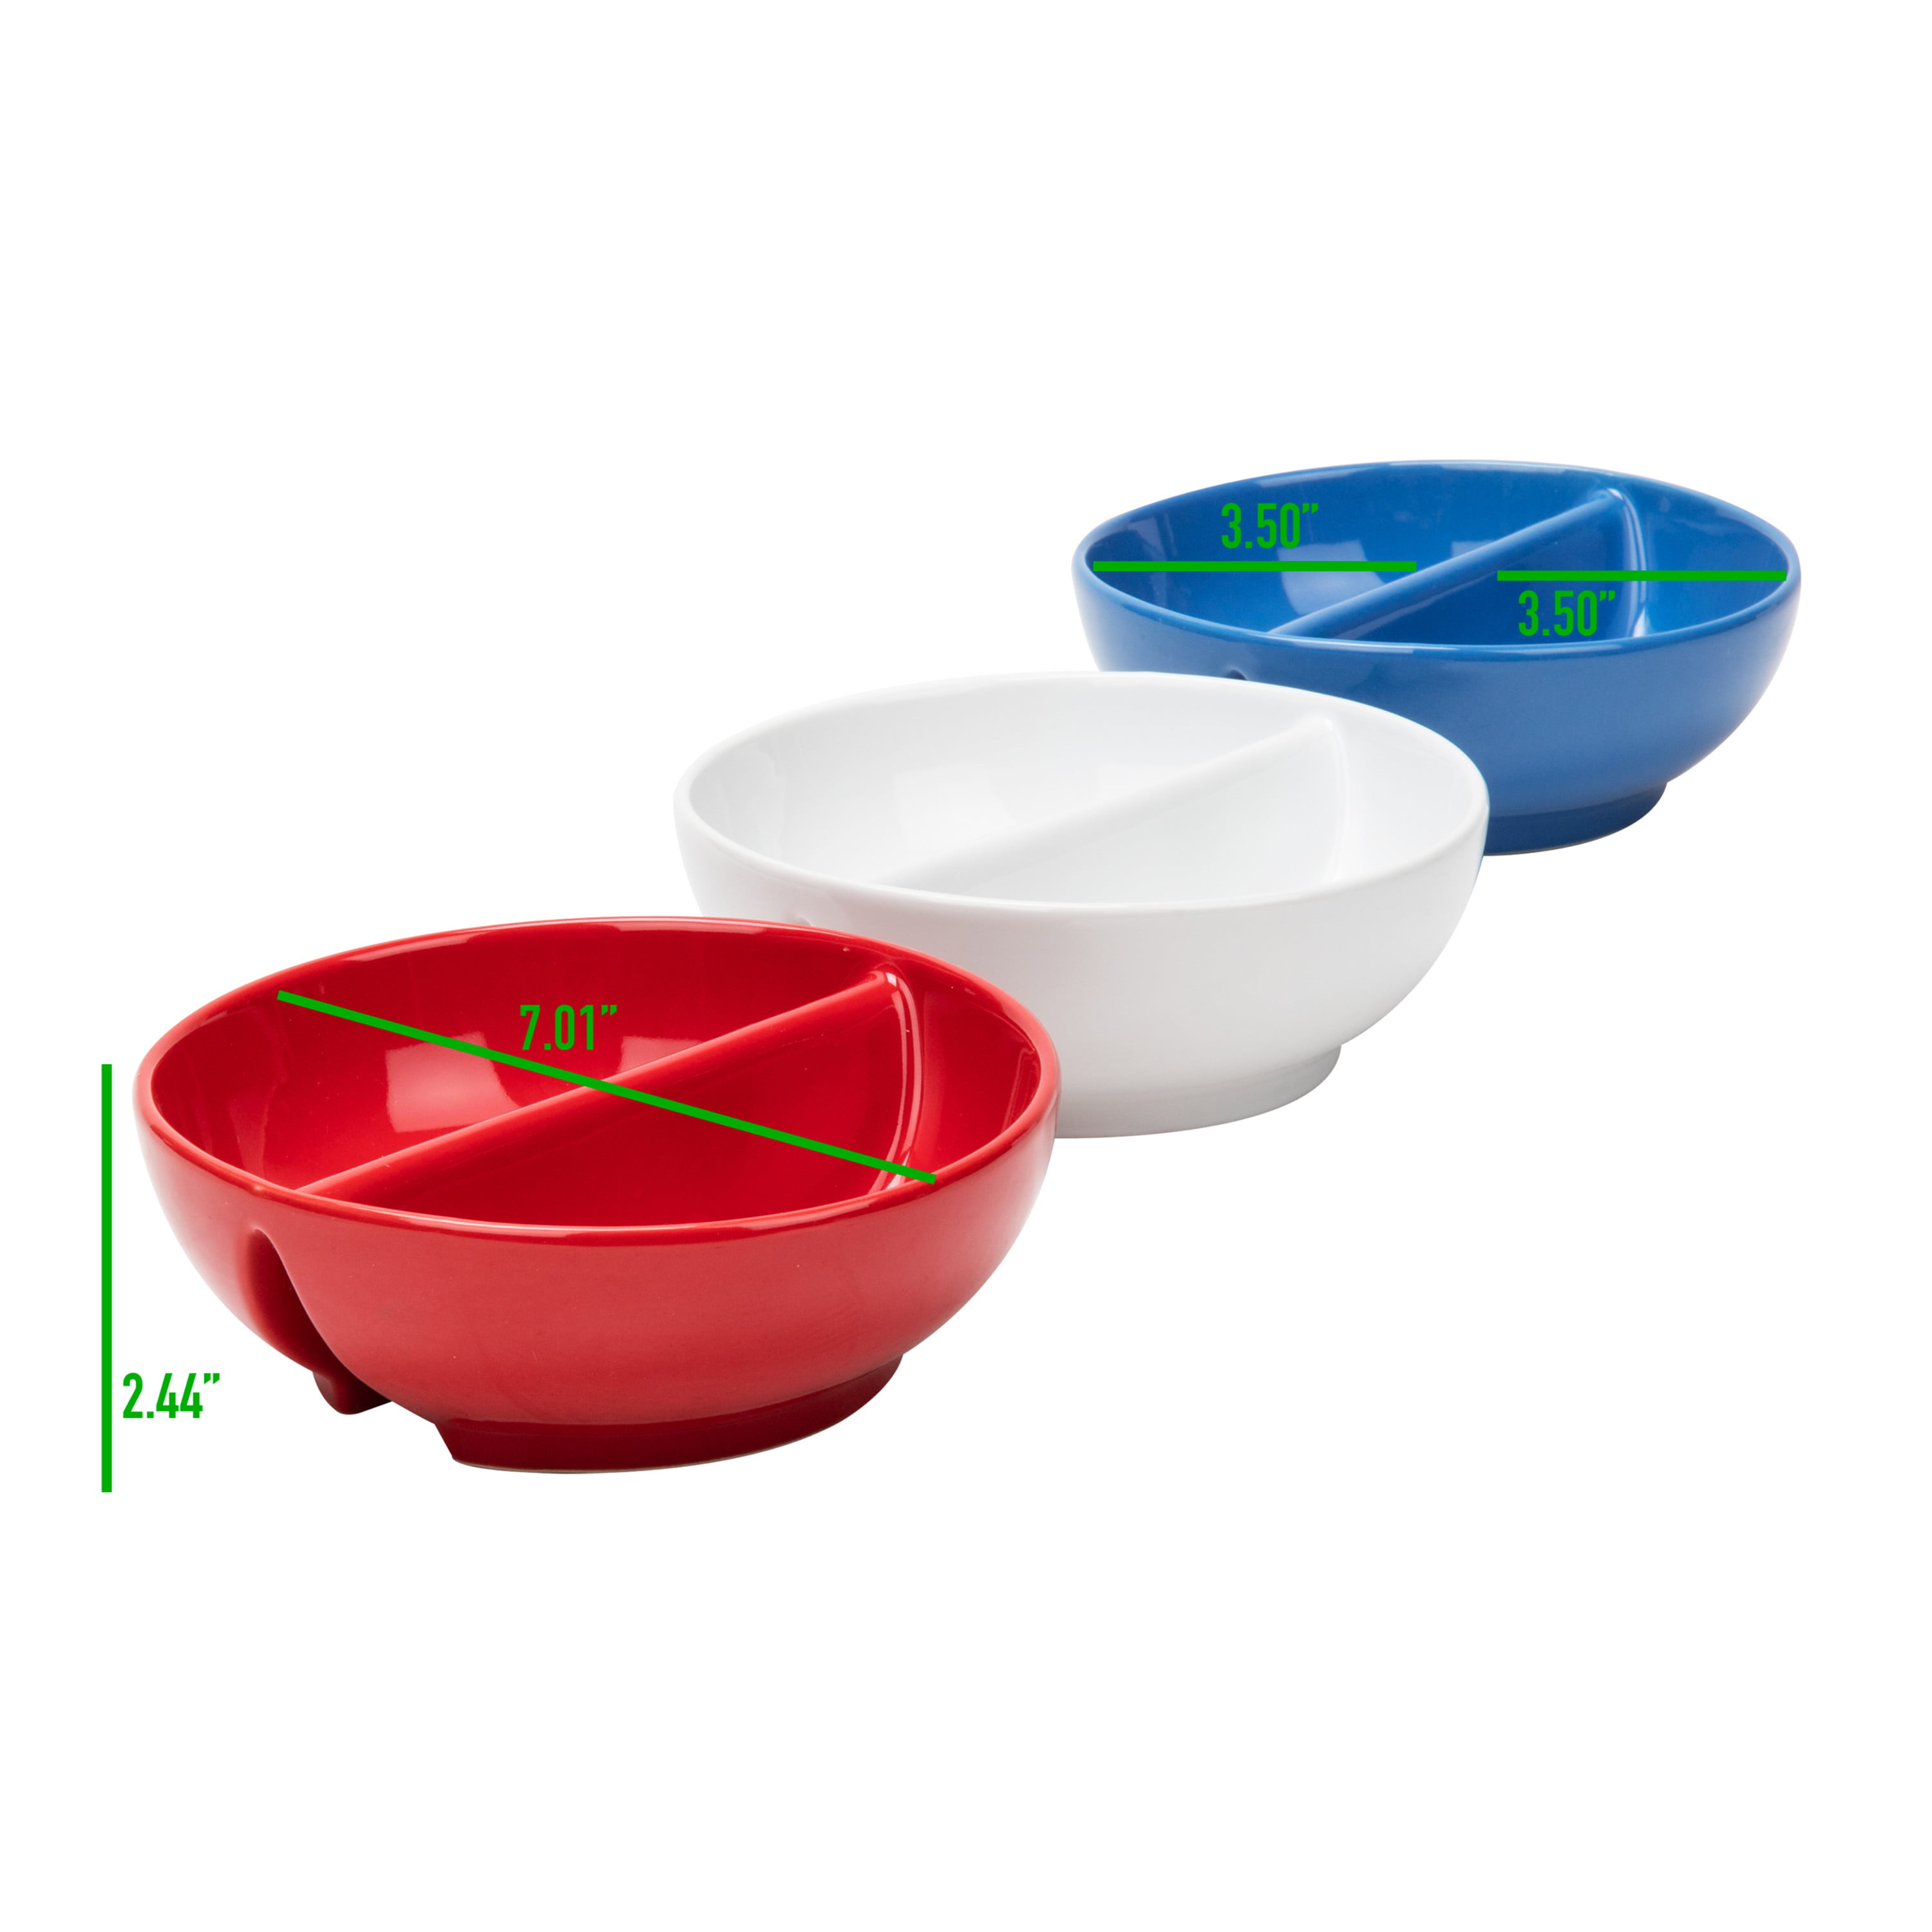 TOPOINT Soggy Cereal Bowl - Bpa-Free Divided Bowls For Kids And Adults